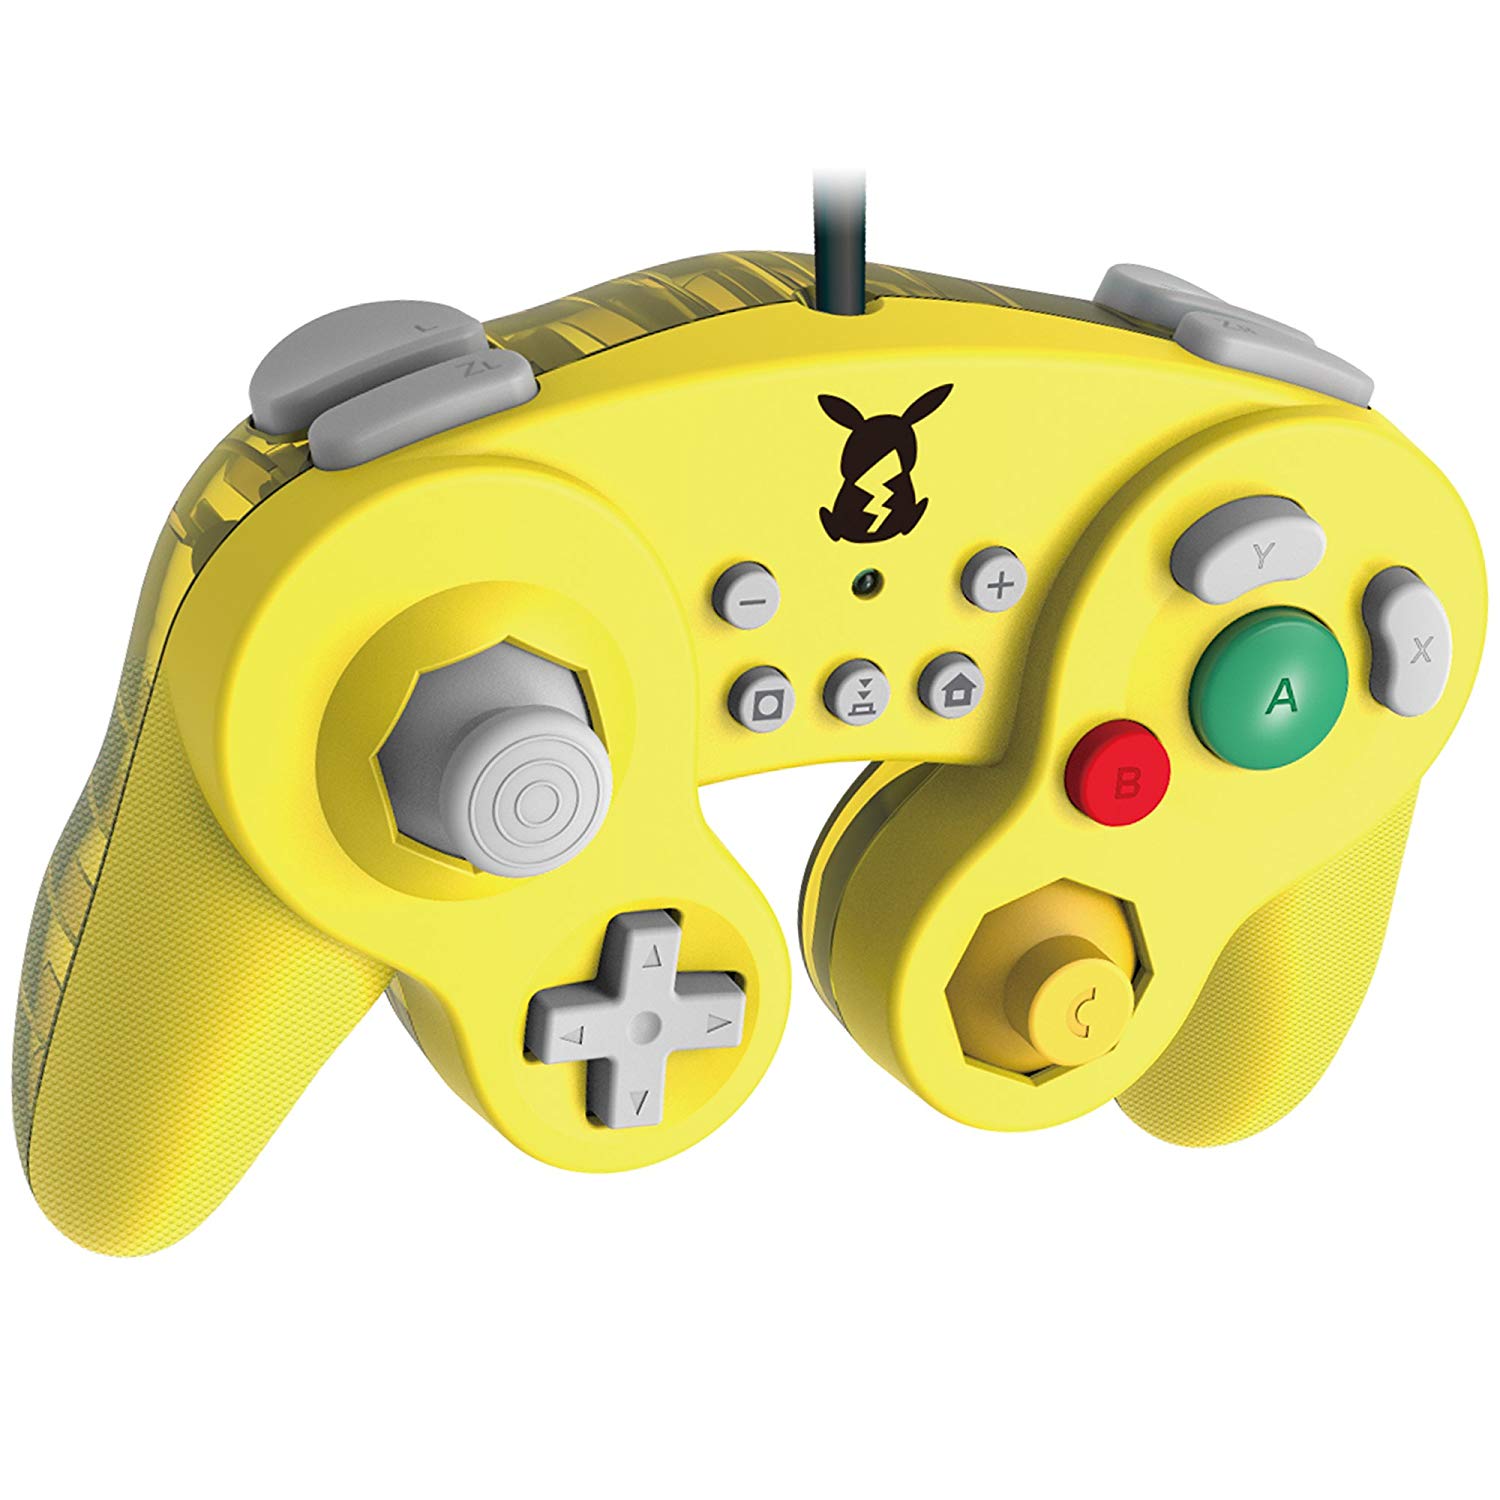 GameCube Mario, HORI Pikachu NintendoSoup – Zelda, Reveals And Controllers Switch For